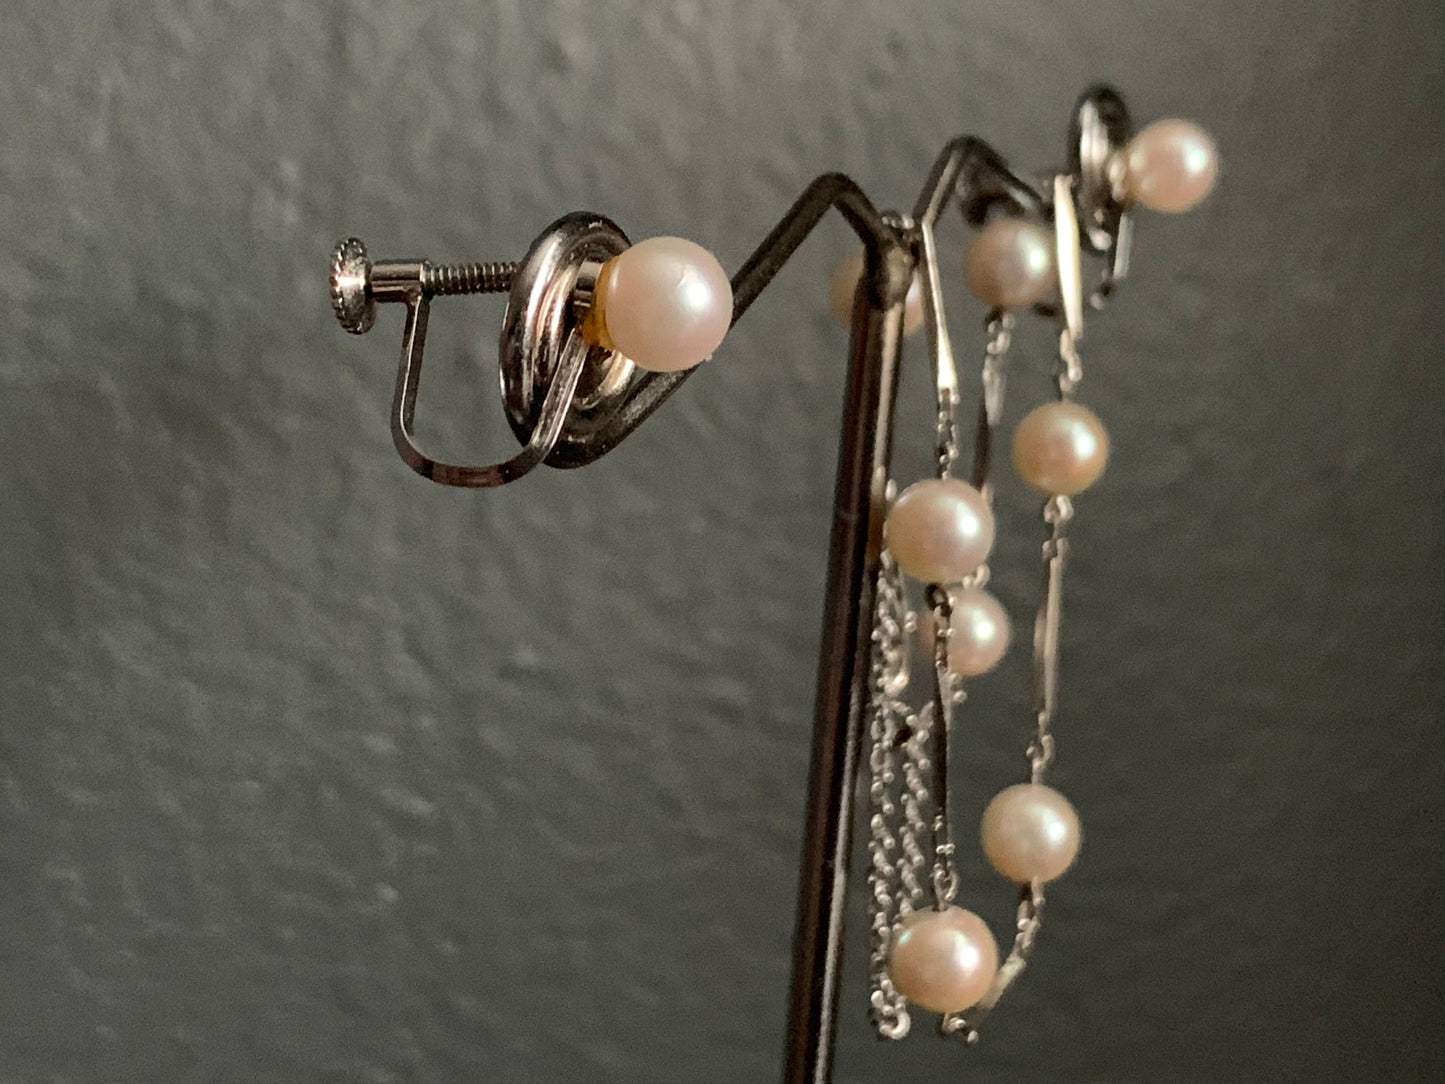 A Pearl and silver ear rings and bracelet